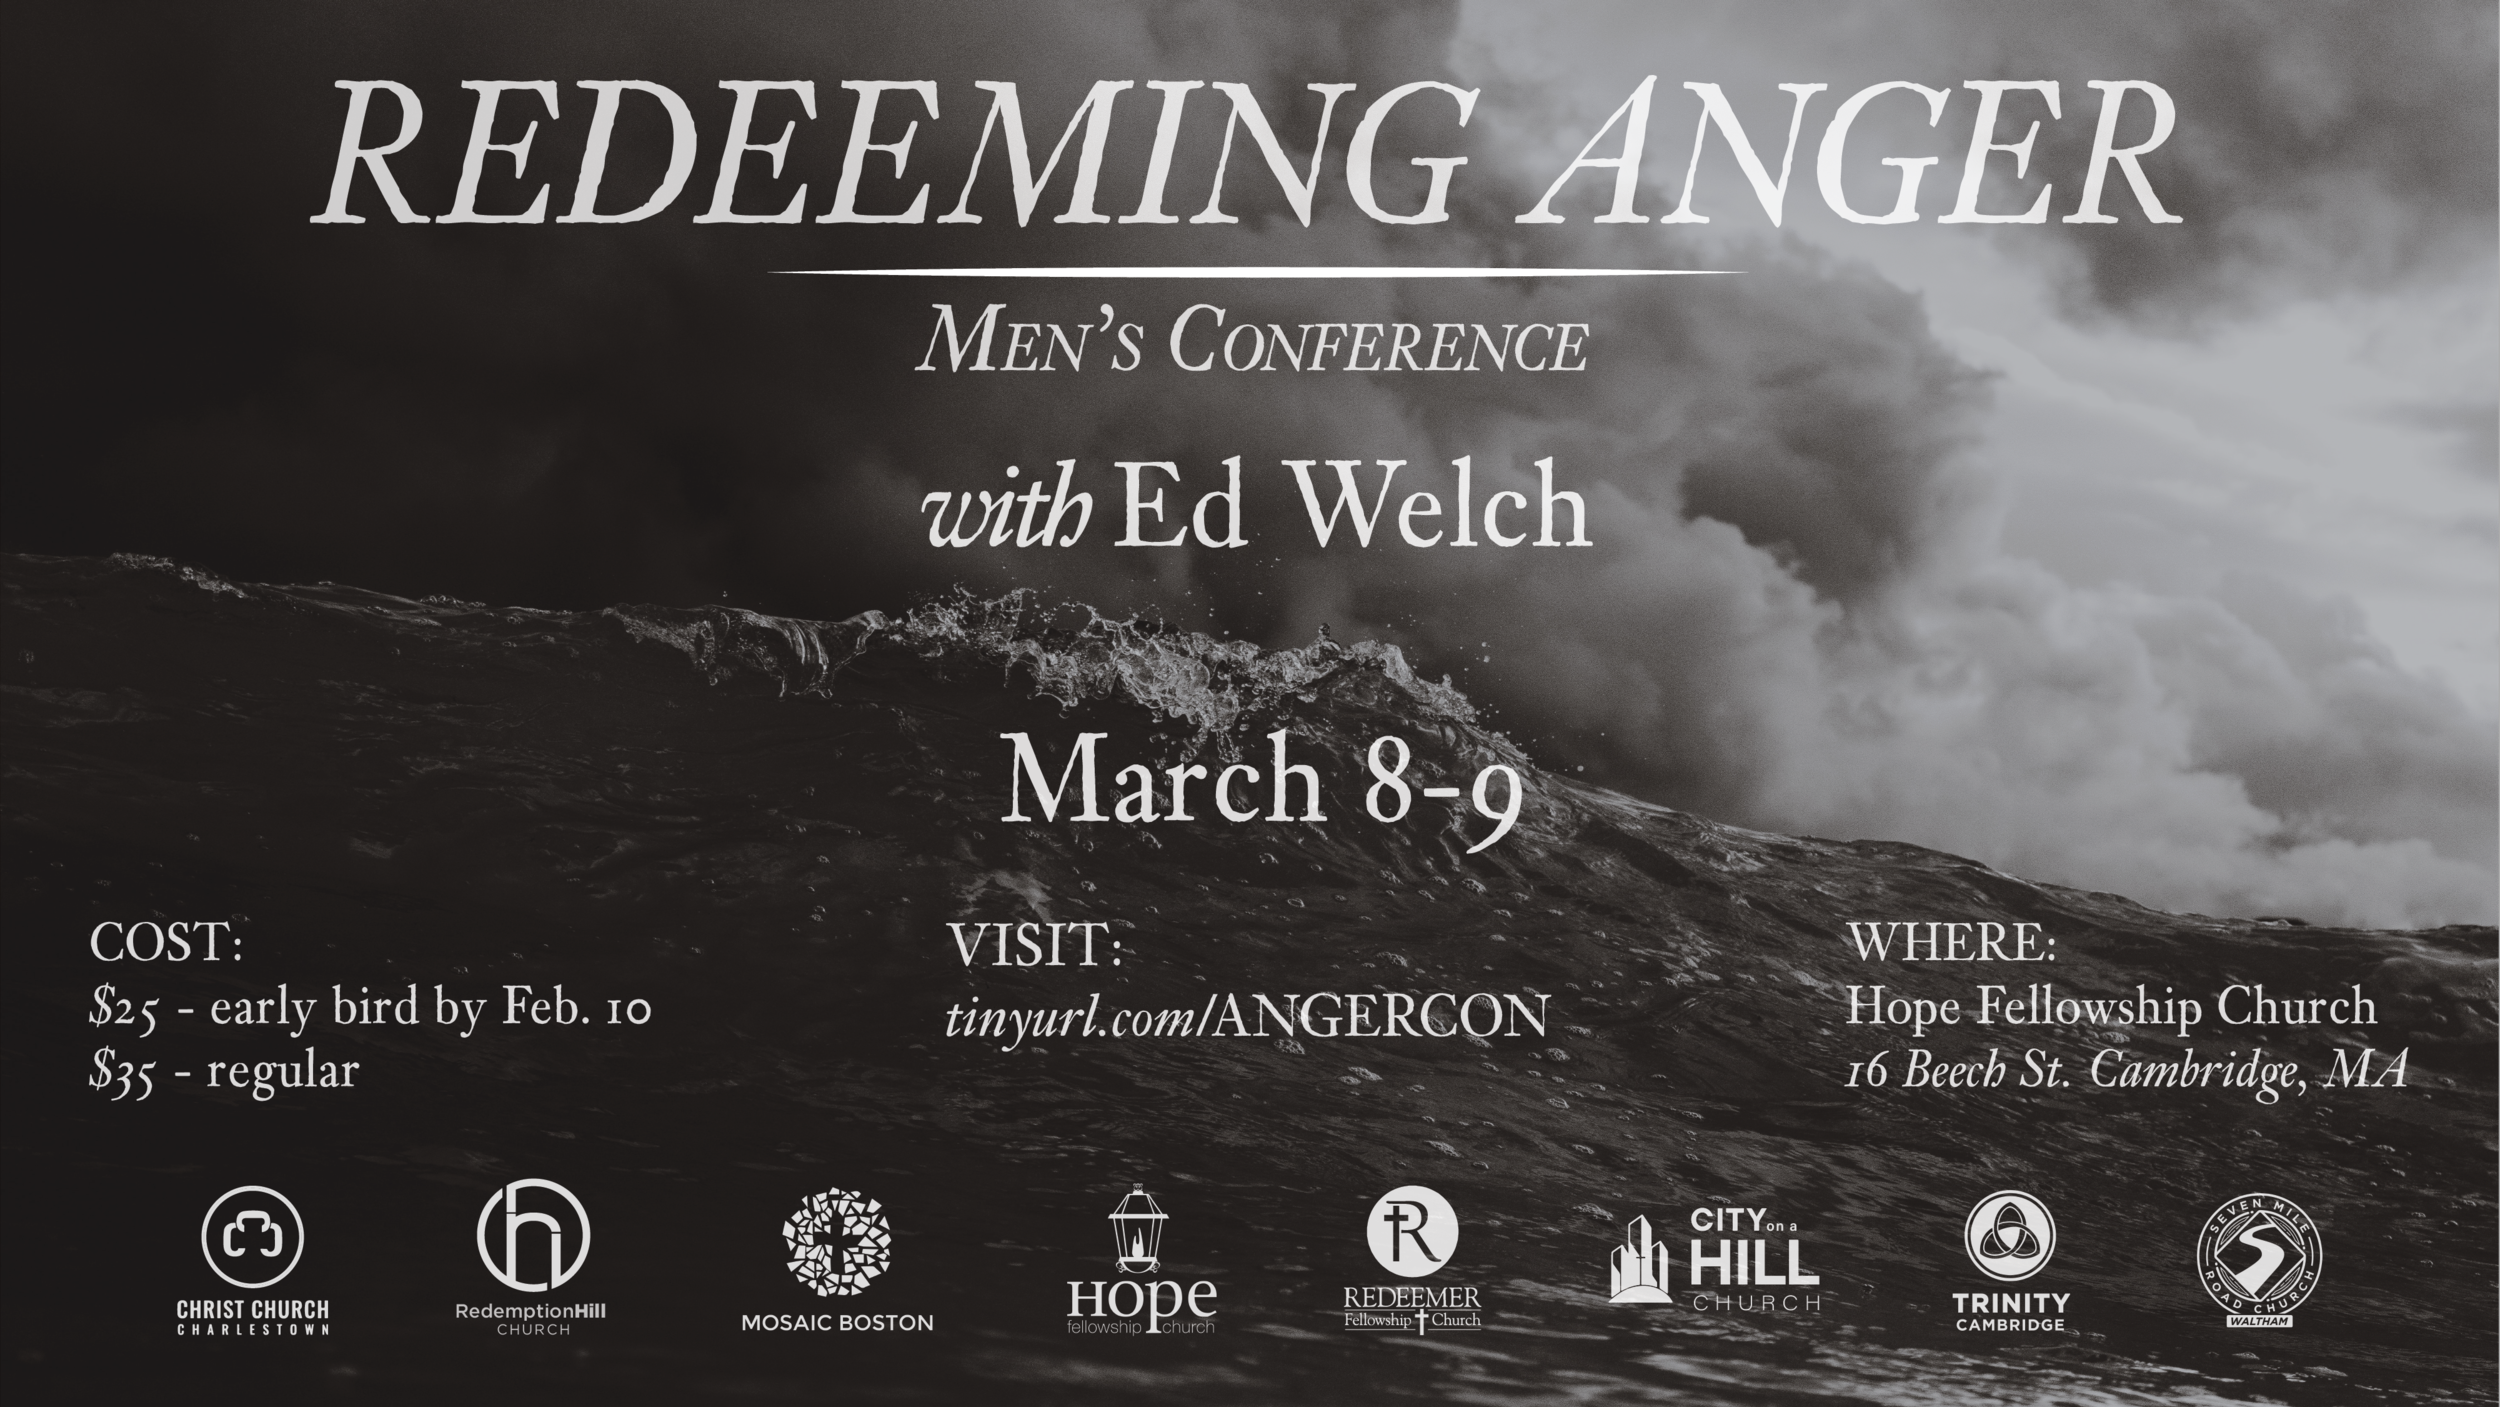 Men's Conference 2019 — Redeeming Anger